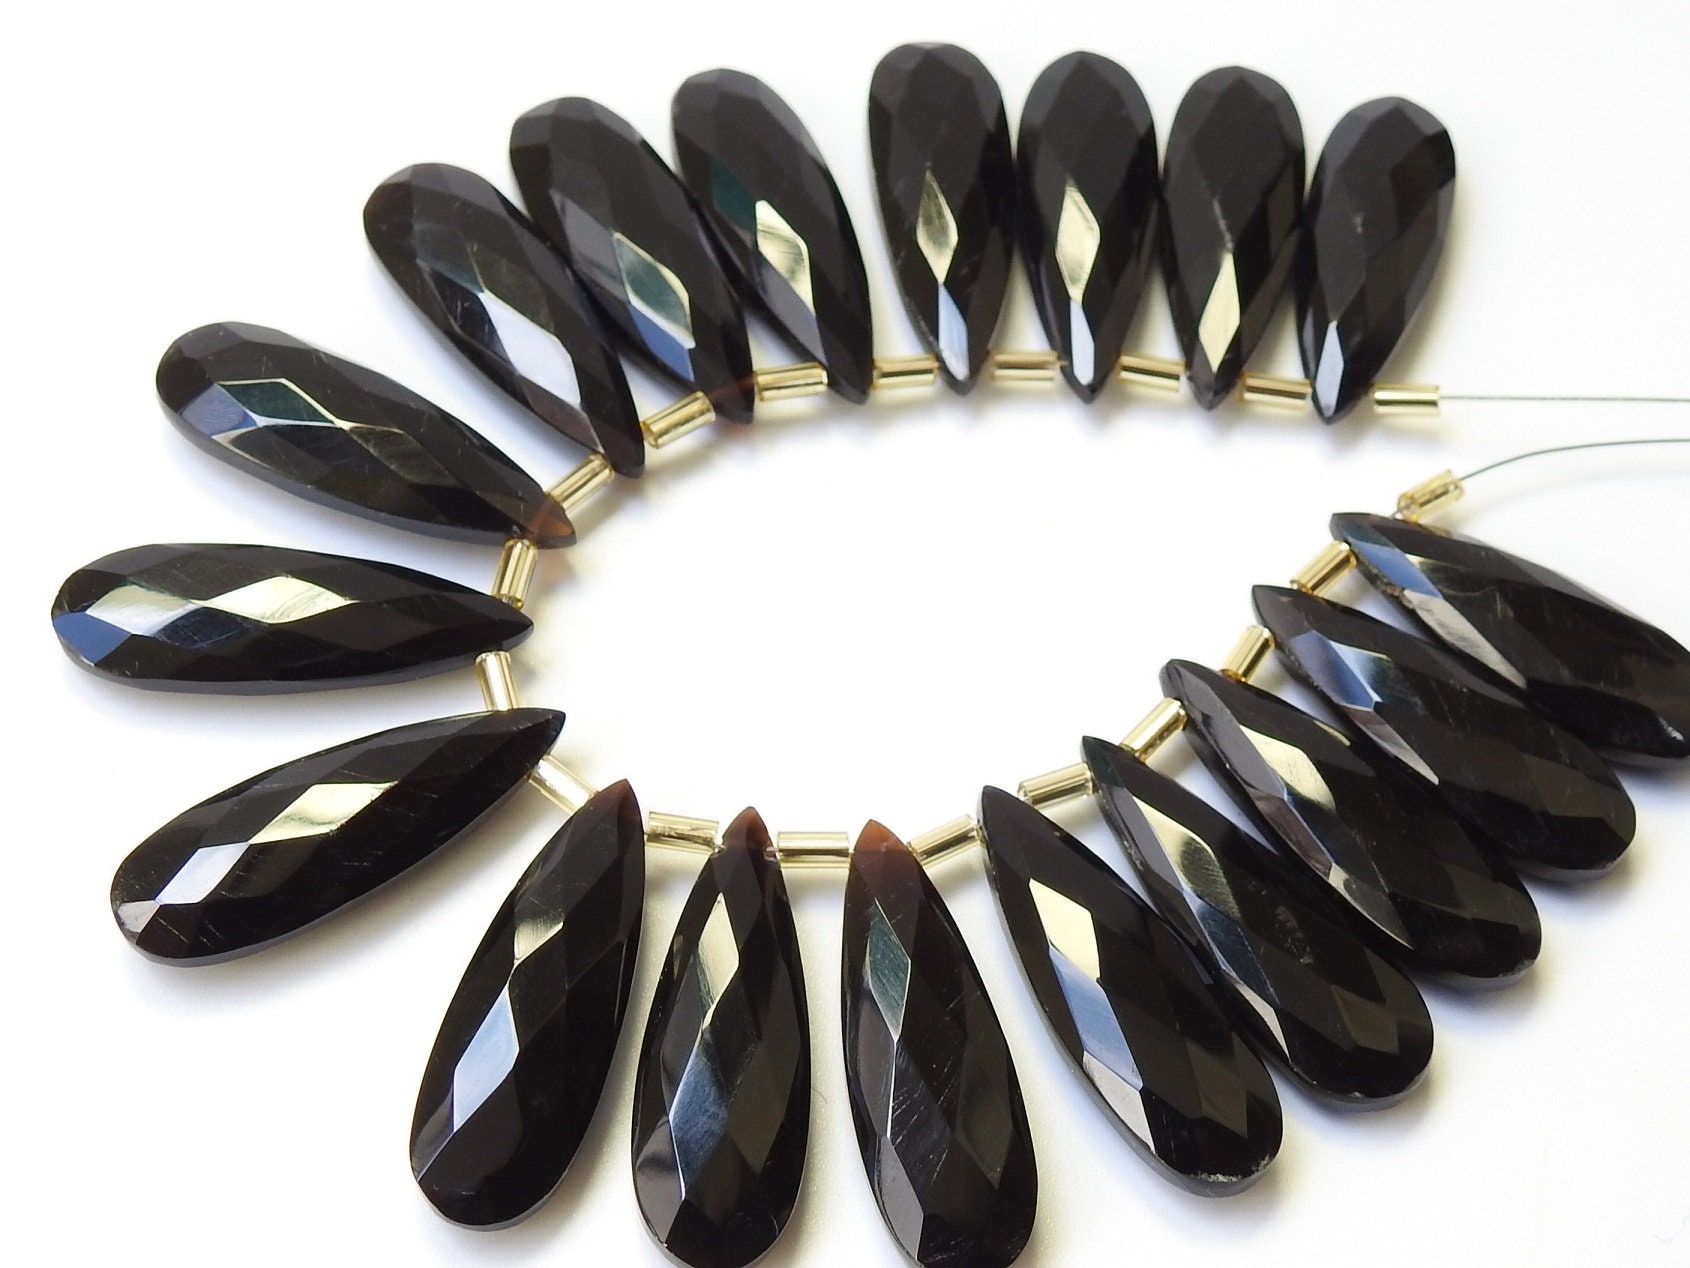 30X10MM Pair,Black Onyx Faceted Teardrop,Long Drop,Handmade,For Making Jewelry,Earrings,Wholesale Price,New Arrival (pme)CY2 | Save 33% - Rajasthan Living 15